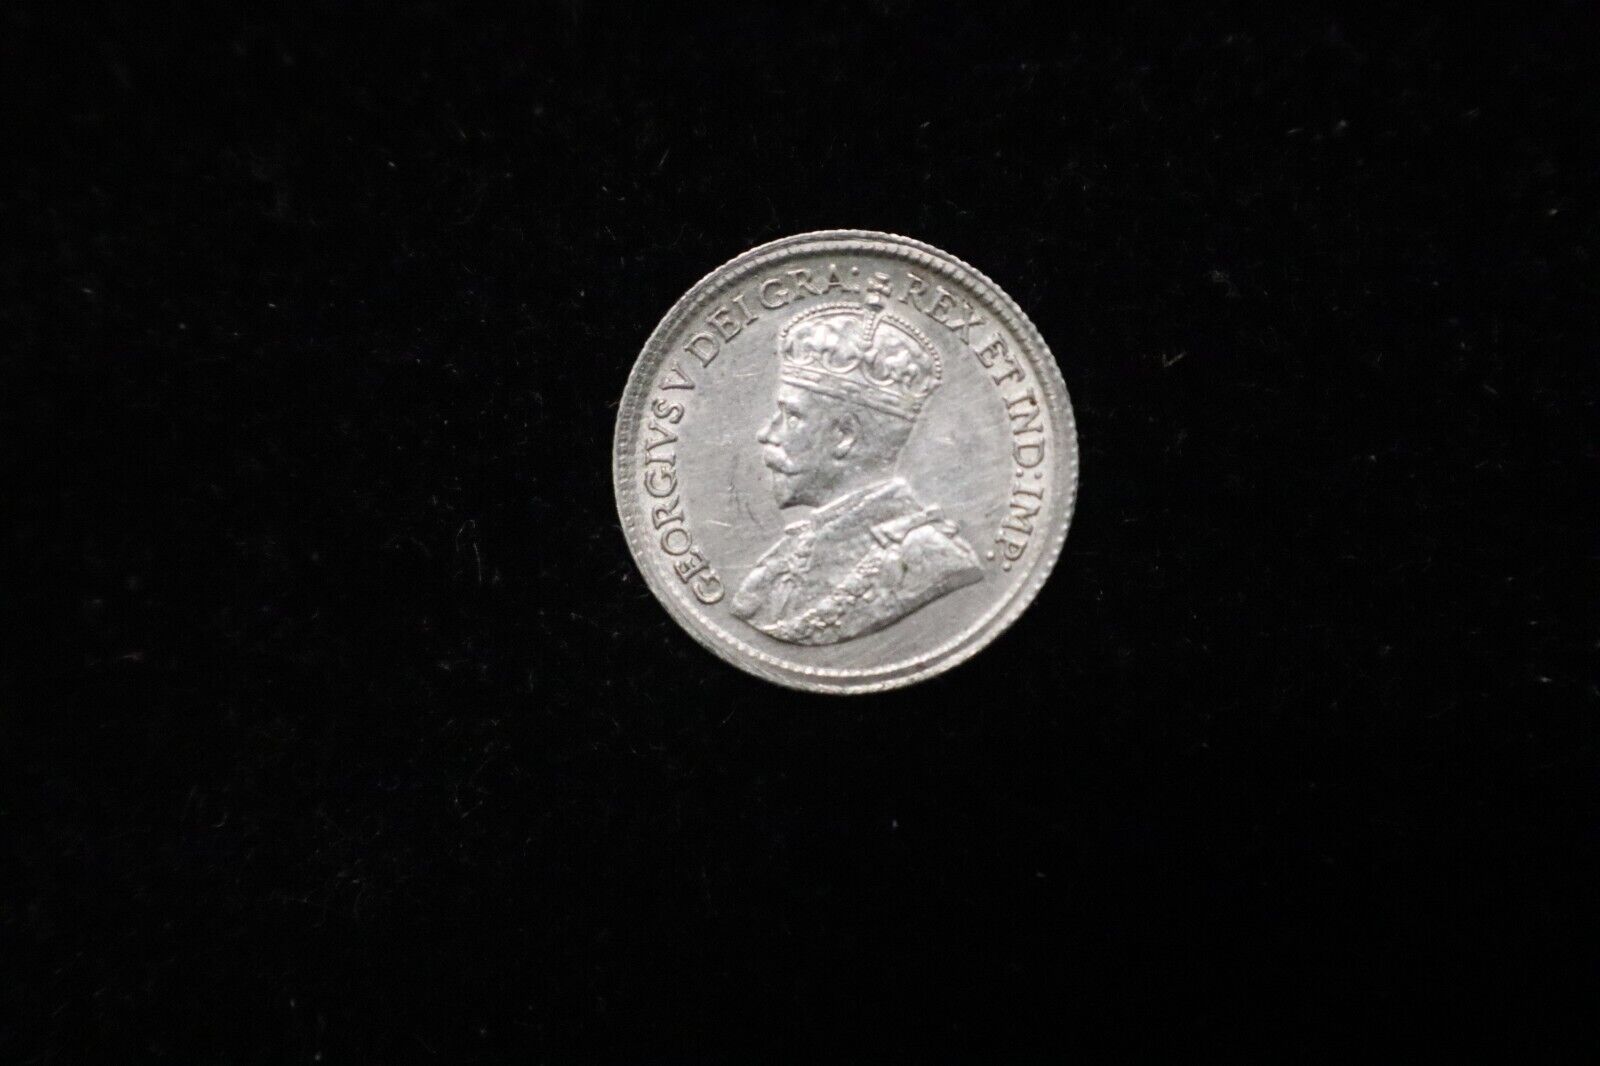 1920 Canadian Silver Five Cent Coin